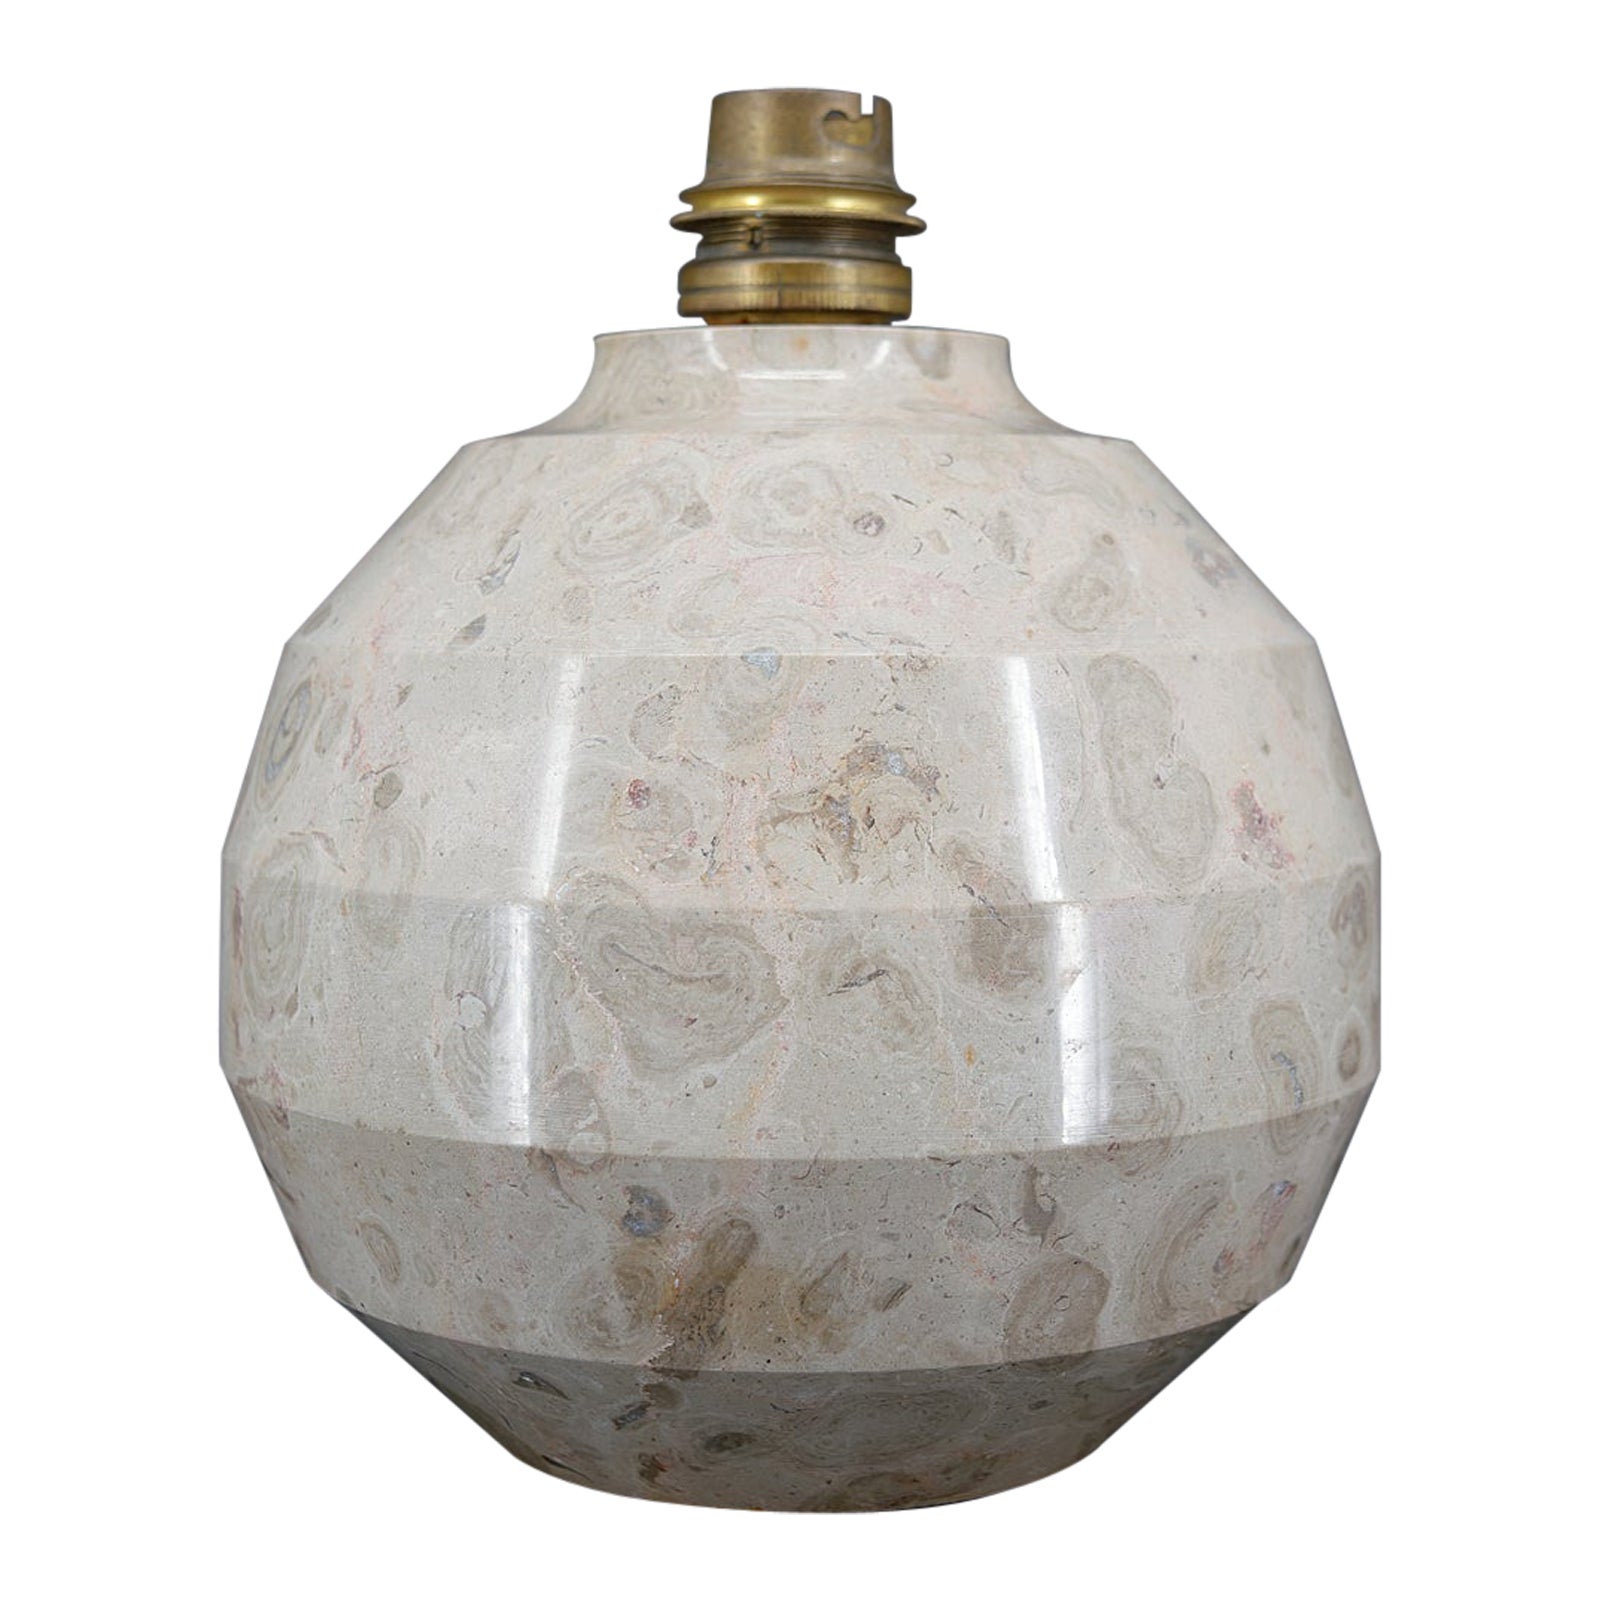 Modernist Art Deco ball lamp in carved marble, France, Circa 1930